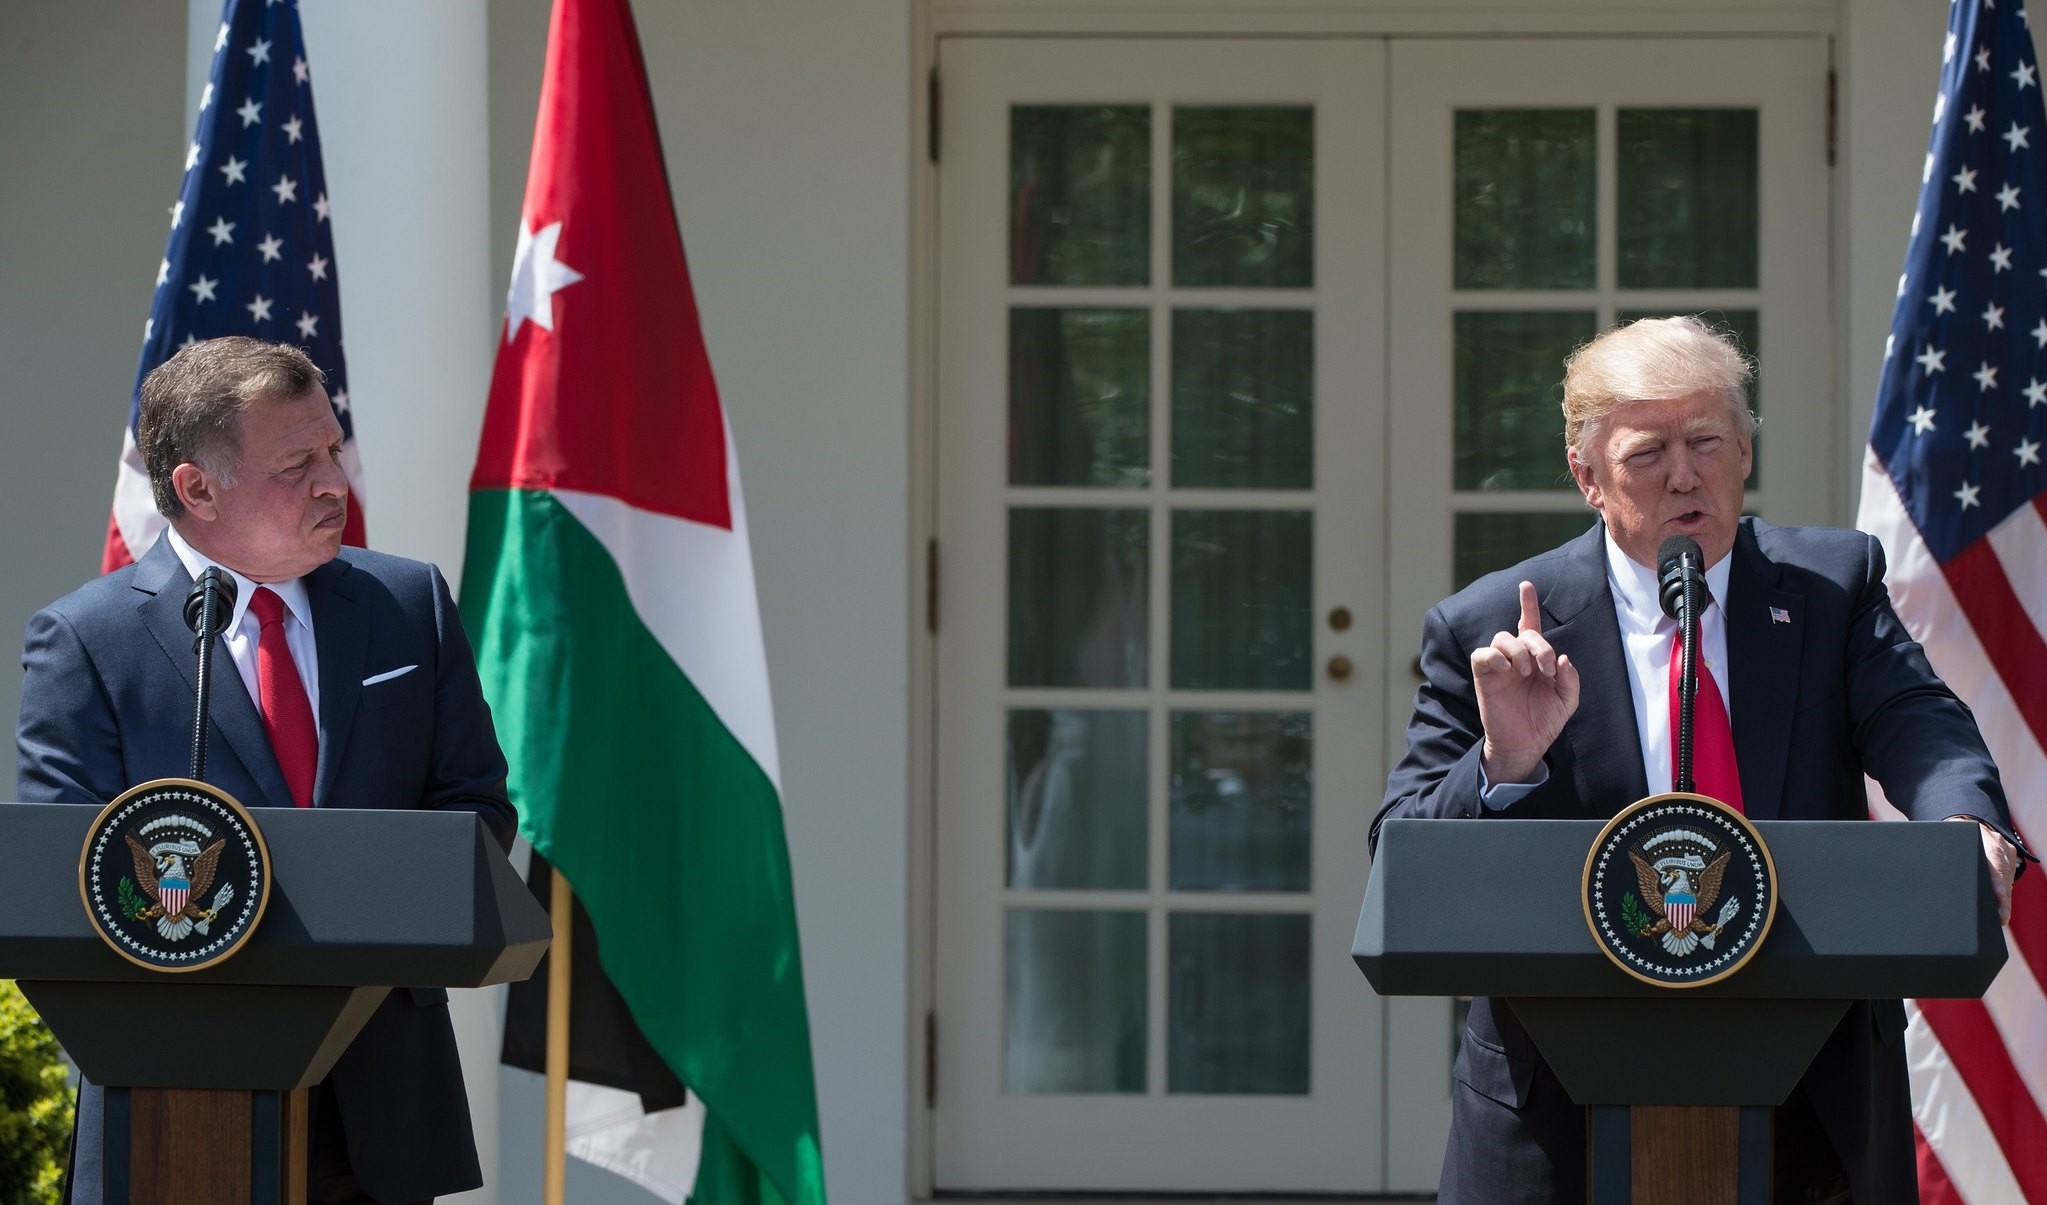 King Abdullah II of Jordan give a press conference with US President Donald Trump in the Rose Garden at the White House in Washington, DC, on April 5, 2017 (AFP Photo)